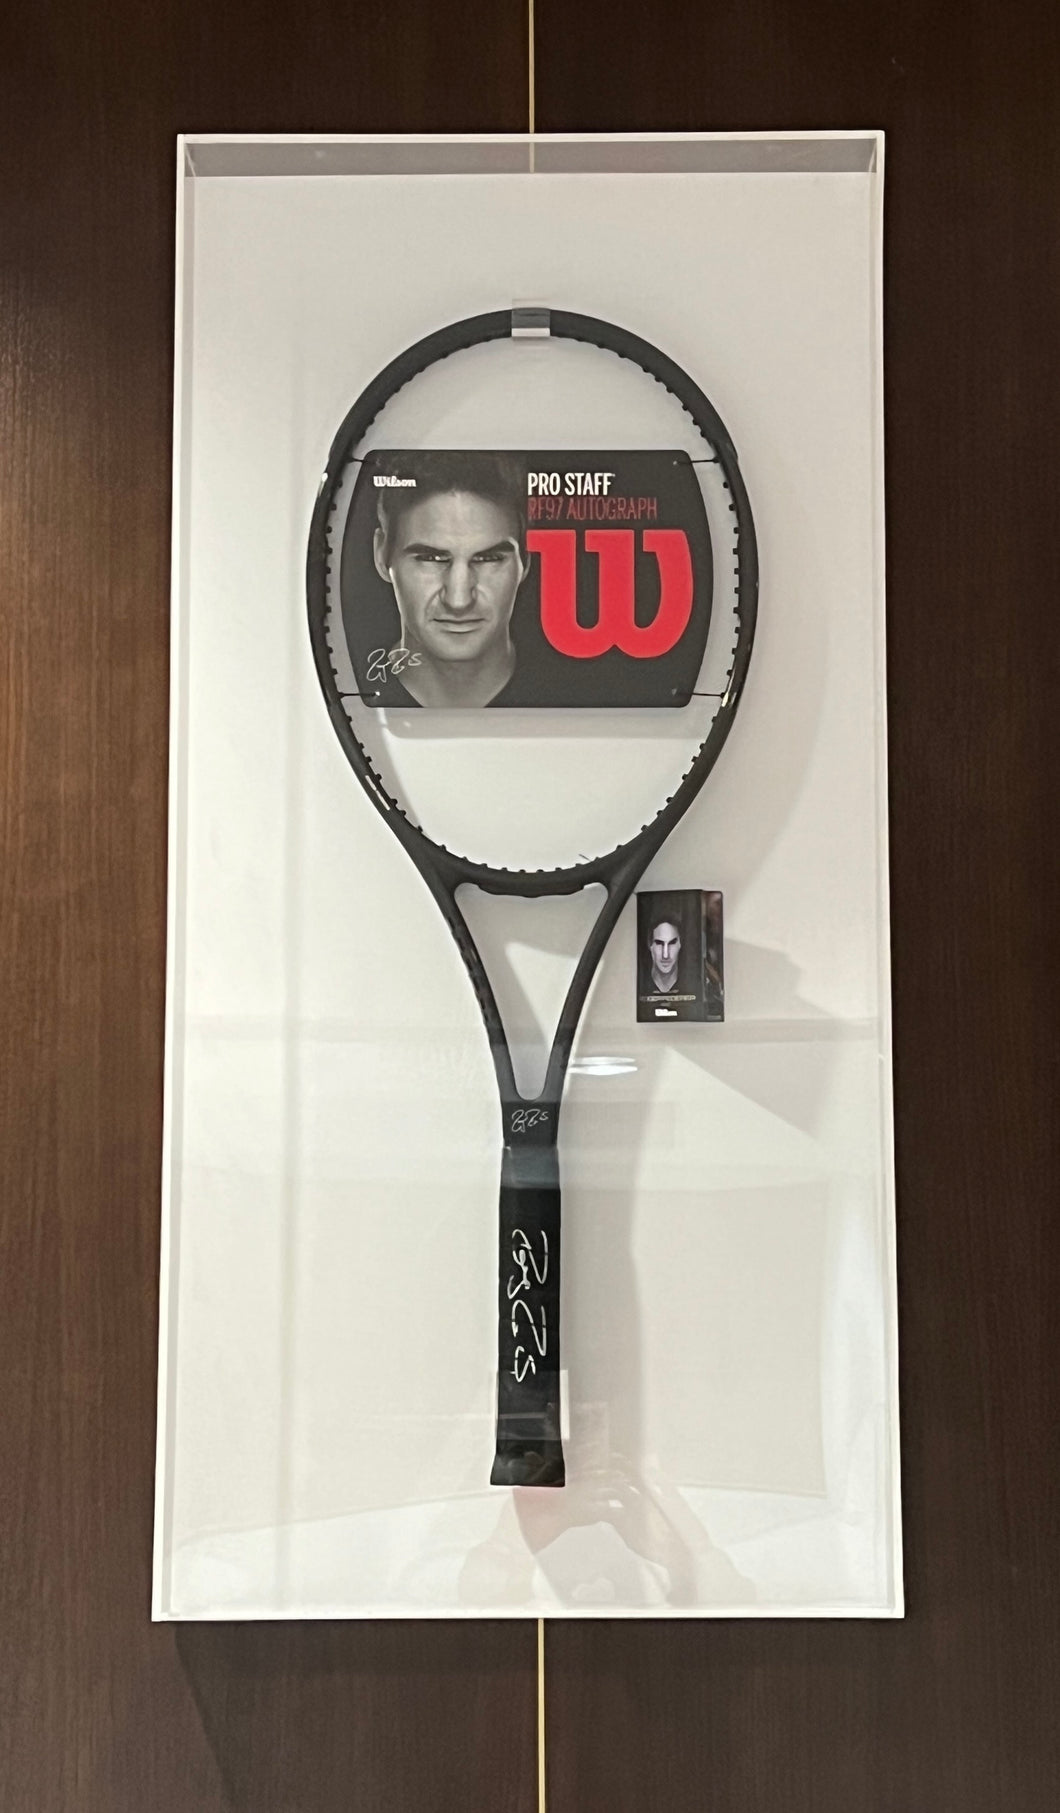 Original Signature by the Amazing Roger Federer